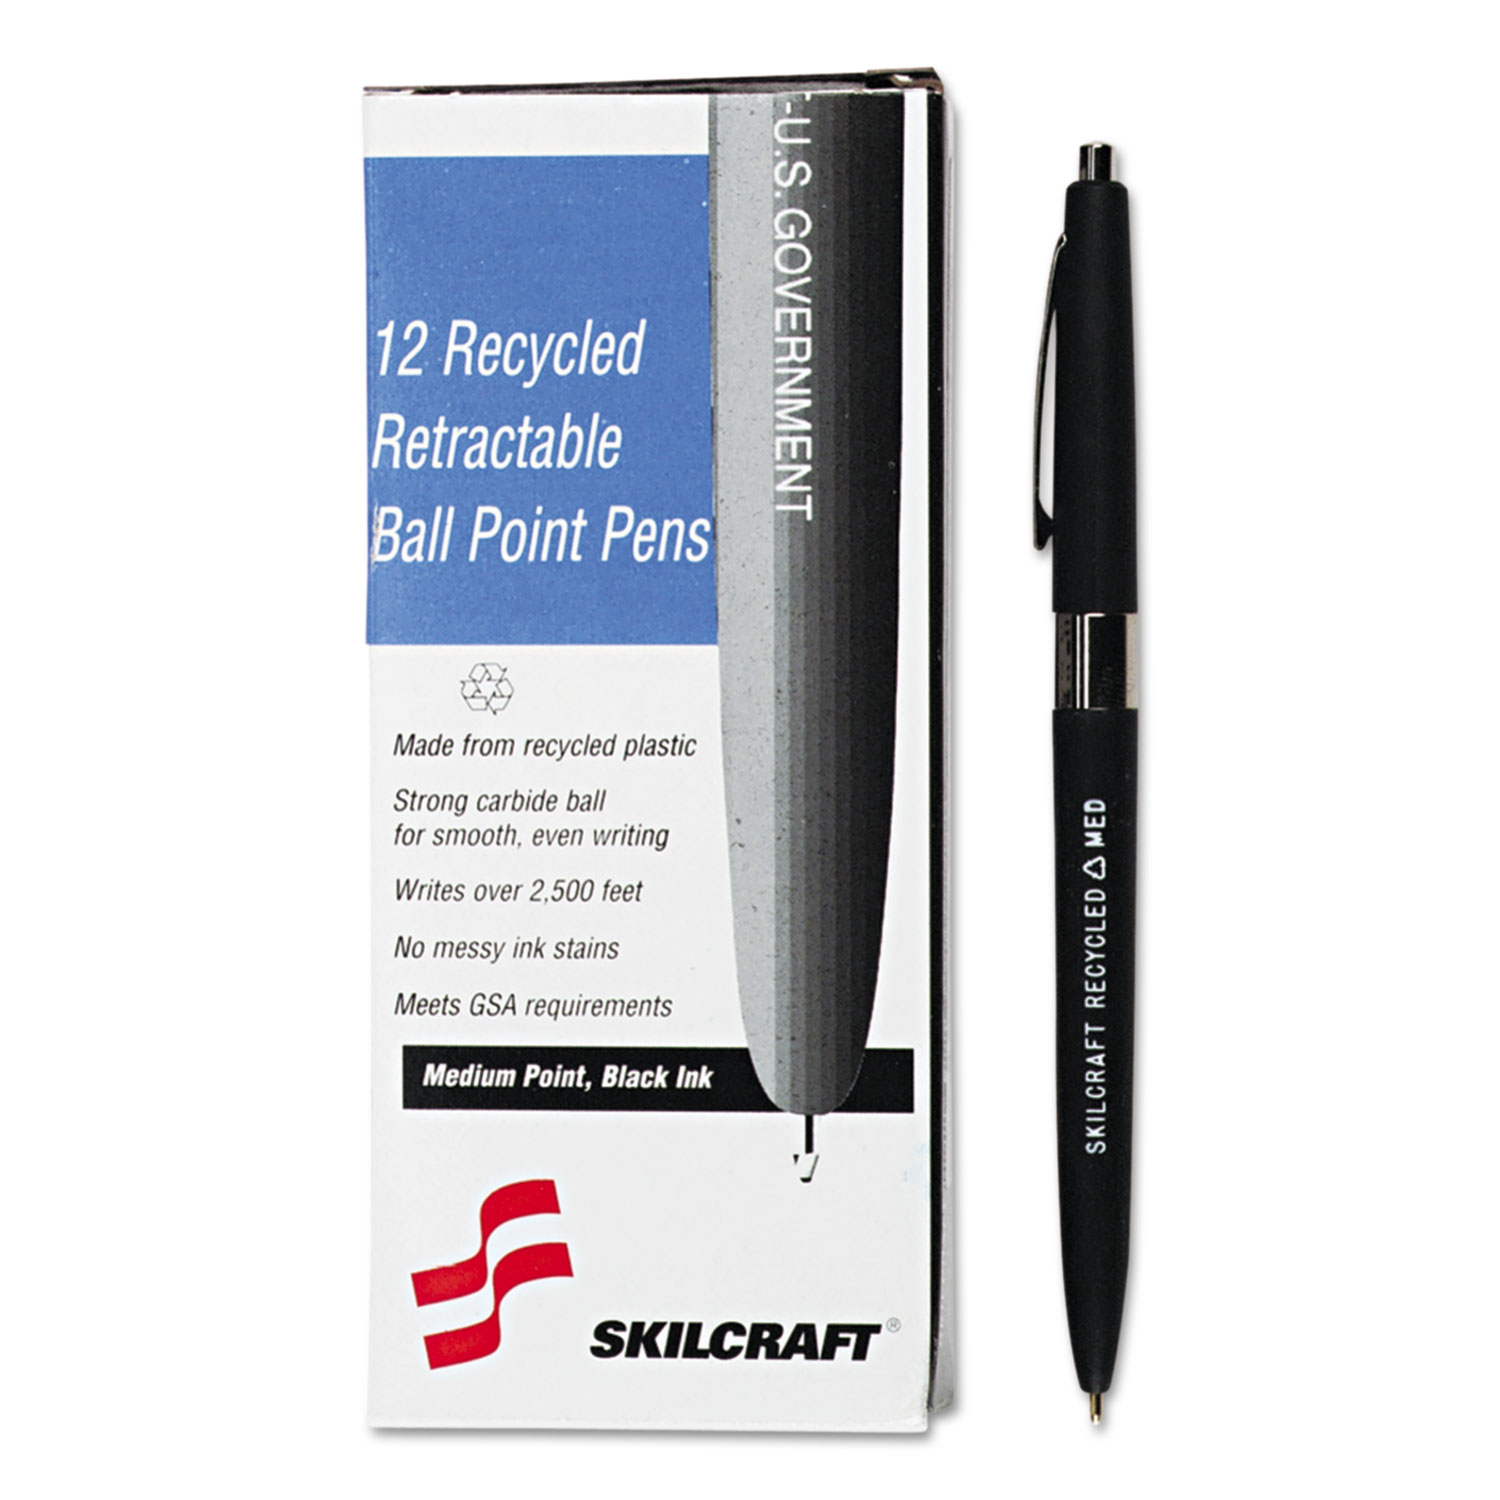 Skilcraft Document Protector, 8 1/2 X 11, 7-Hole Punch